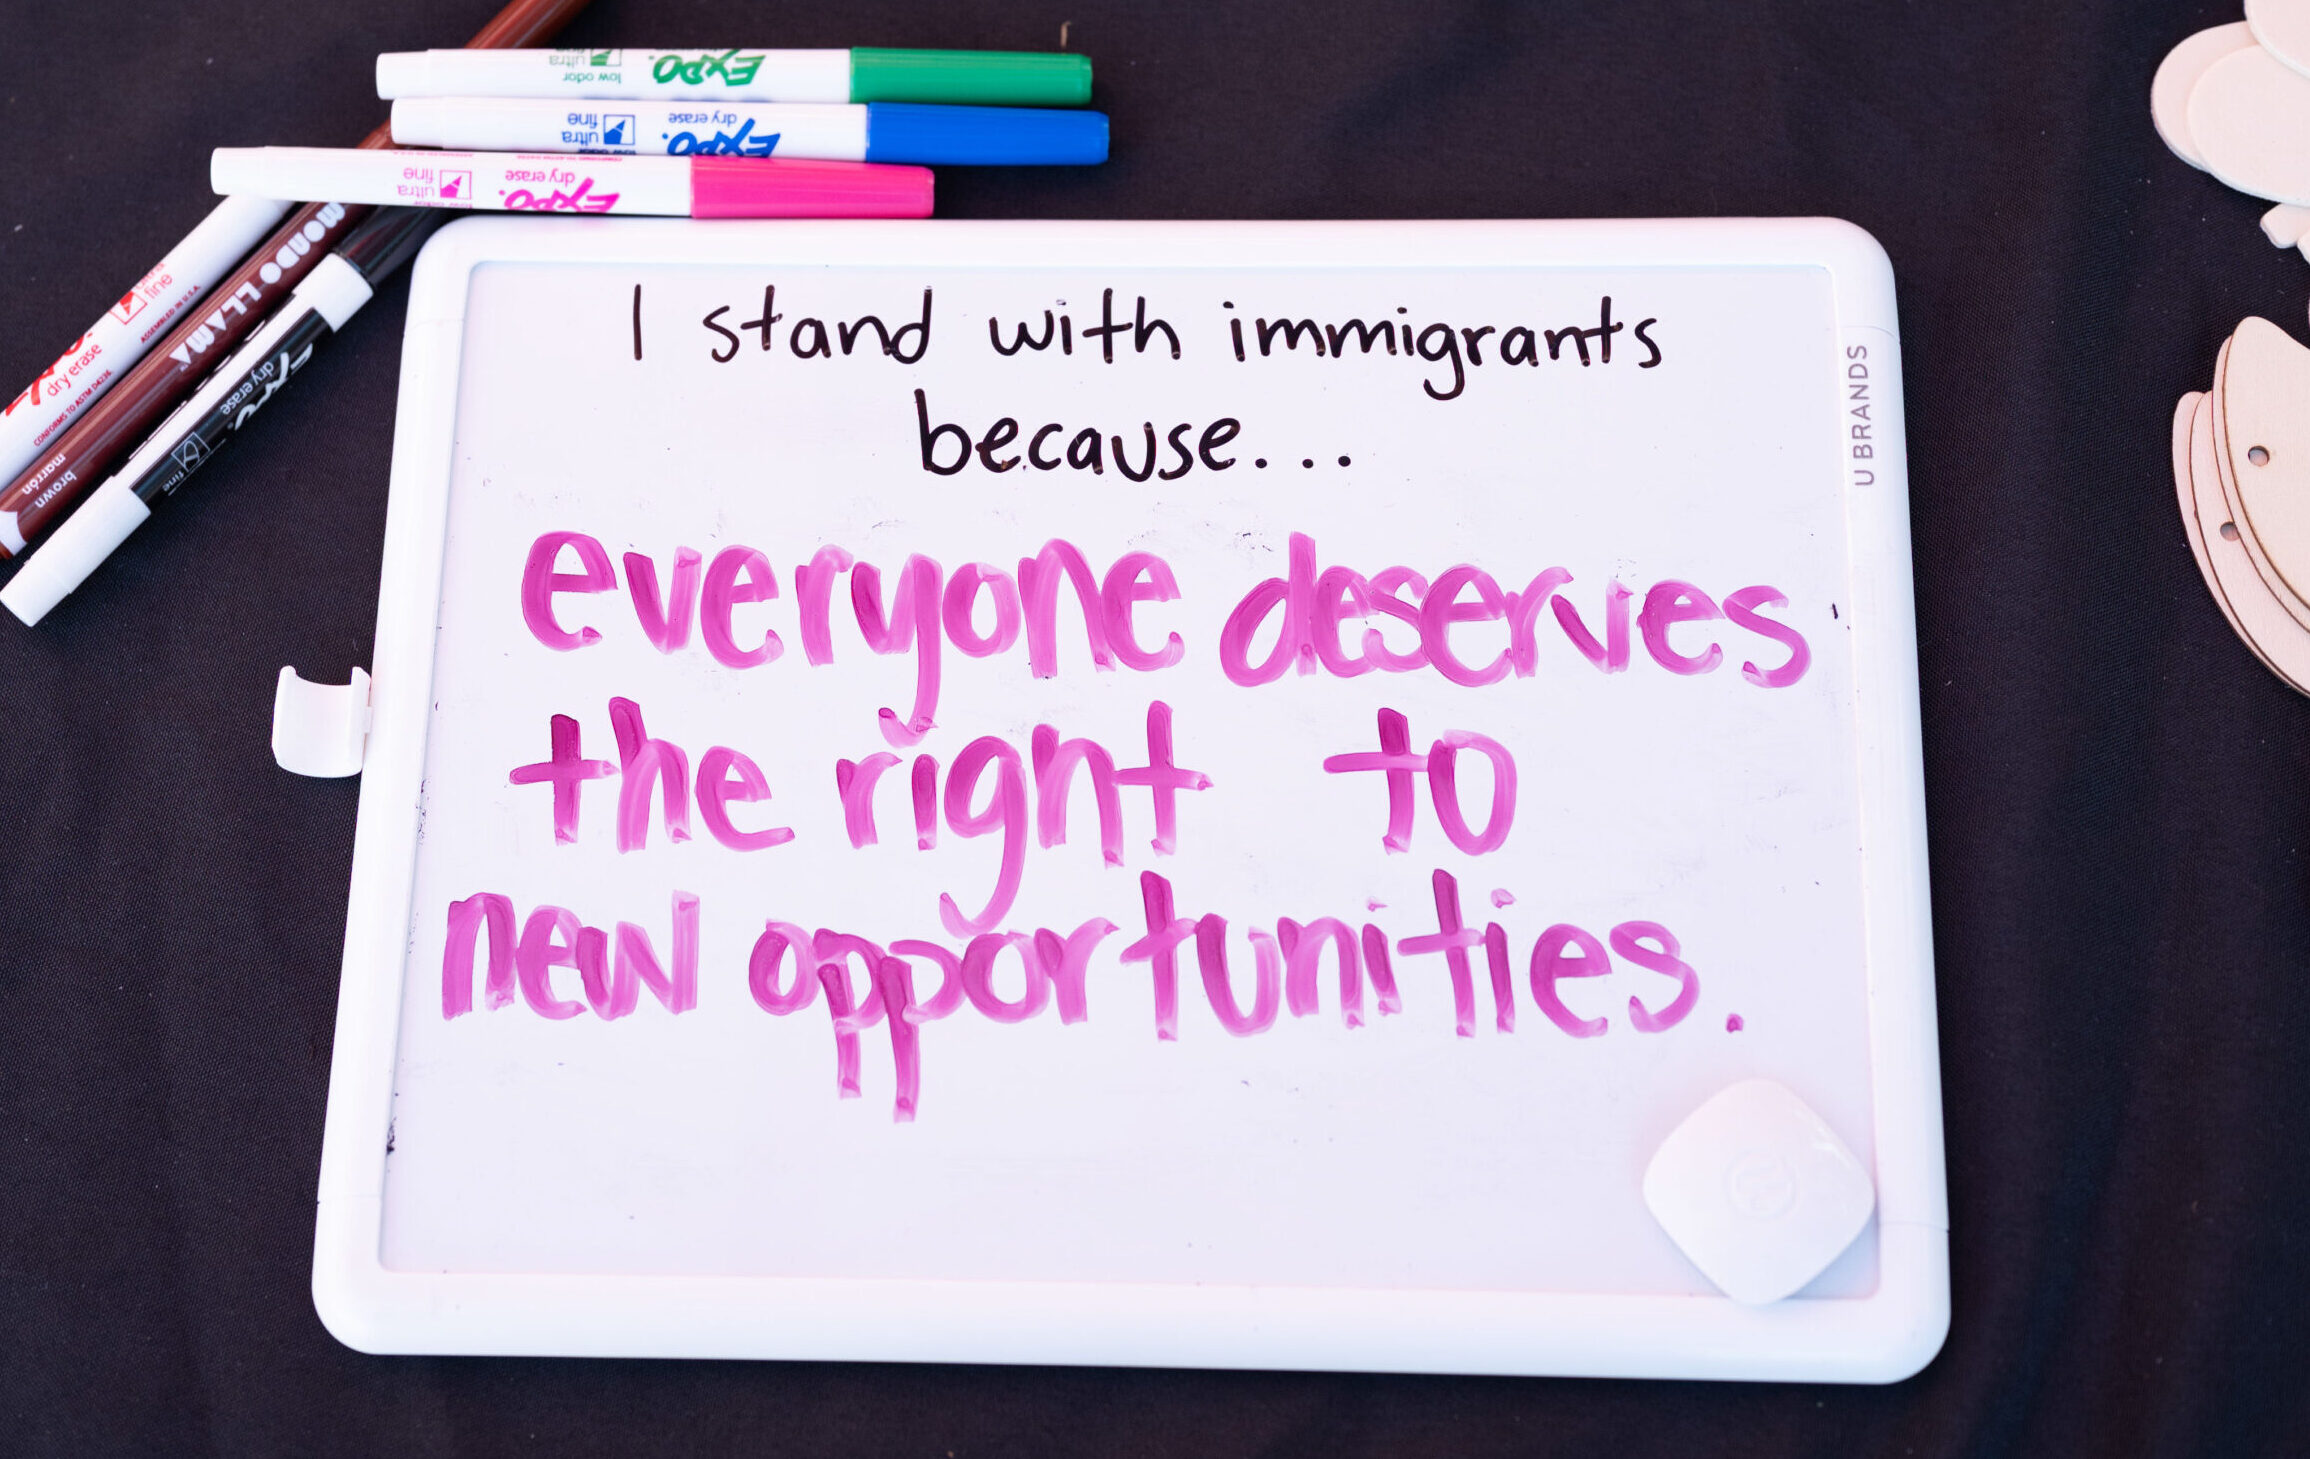 A dry erase board with pink marker reads "I stand with immigrants because...everyone deserves the tight to new opportunities."